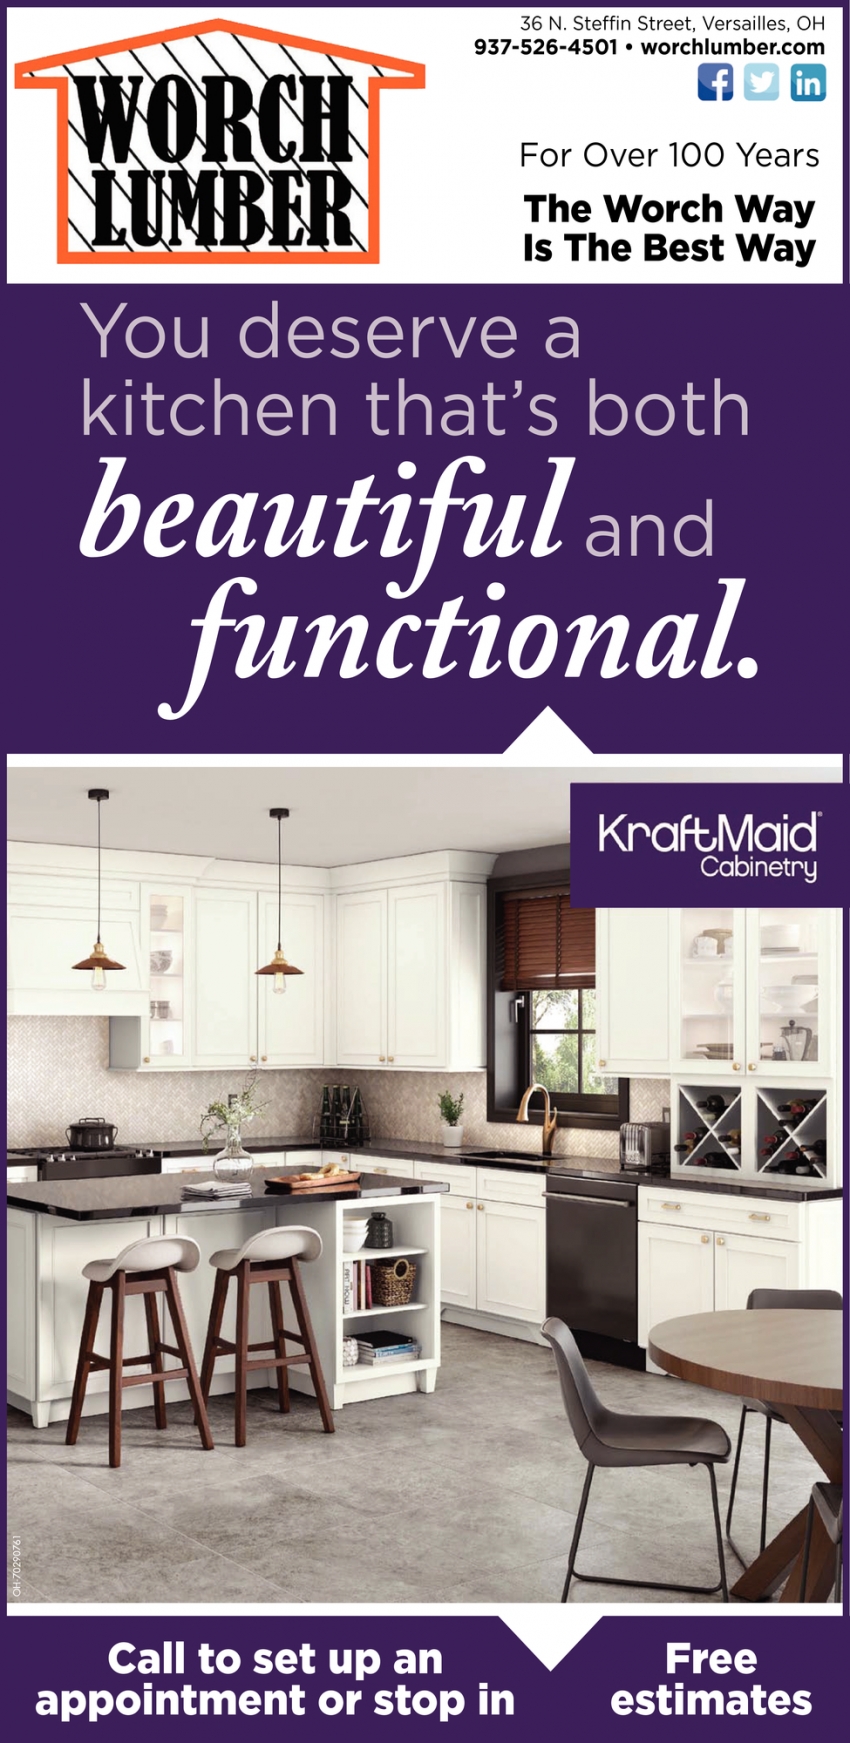 You Deserve A Kitchen That's Both Beautiful and Functional